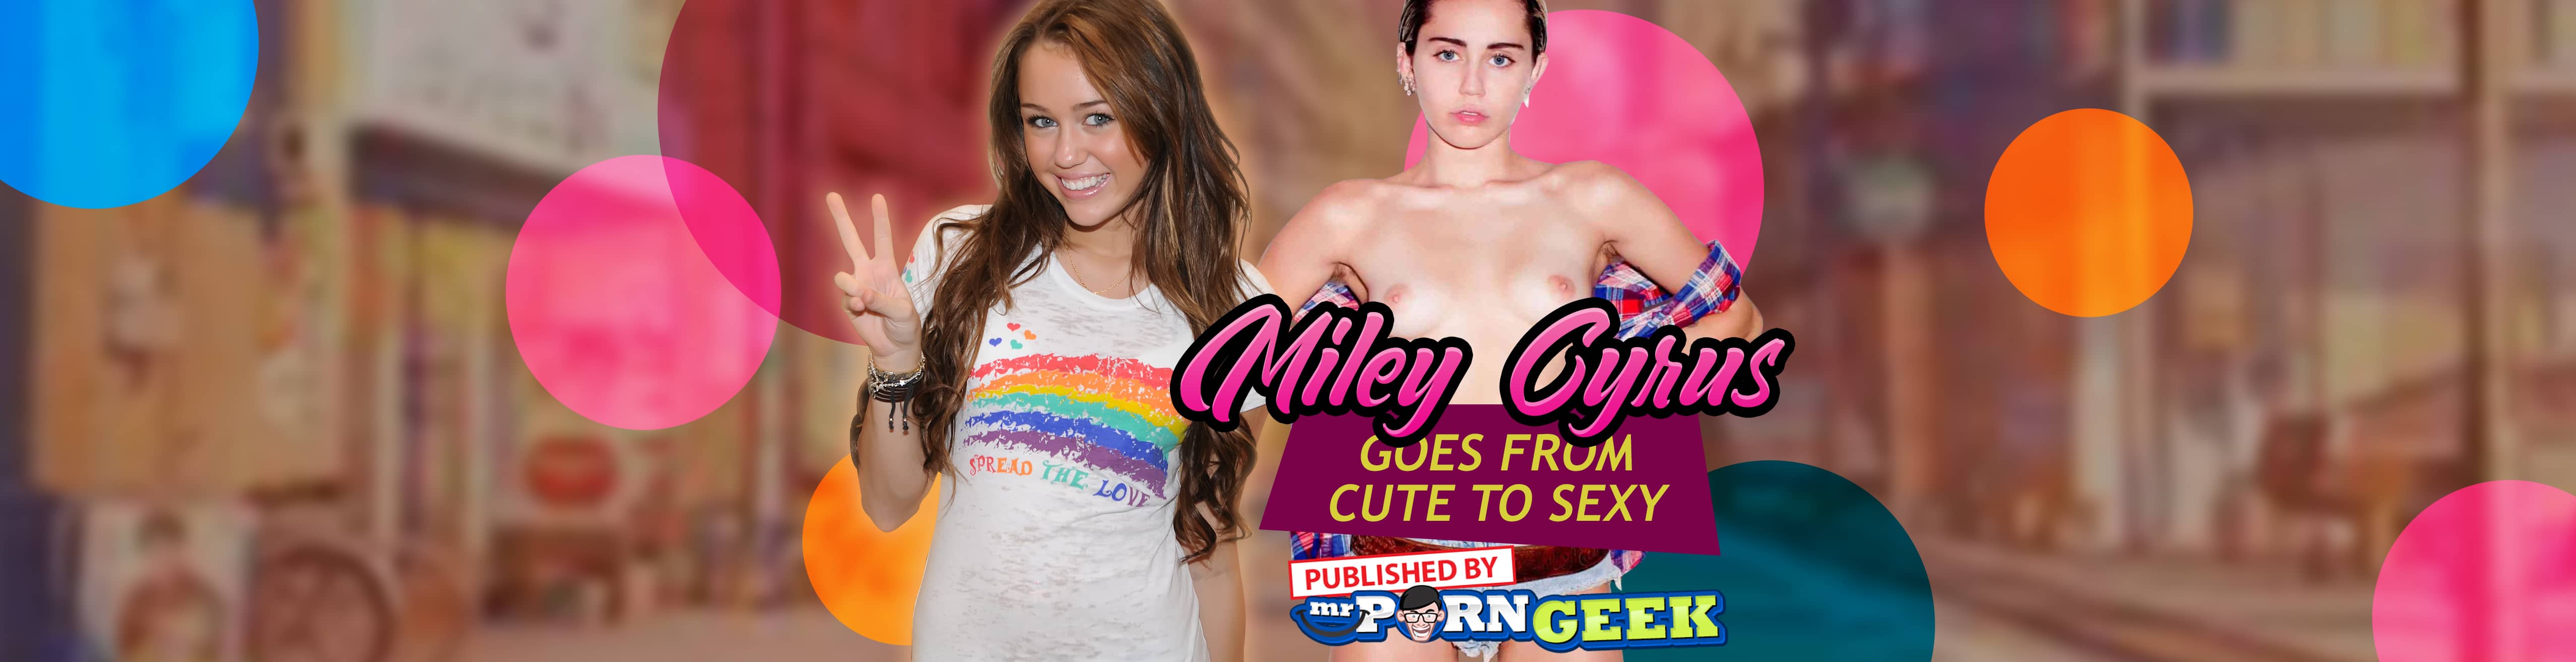 Miley Cyrus Nude She Goes From Cute To Sexy — MrPornGeek Blog